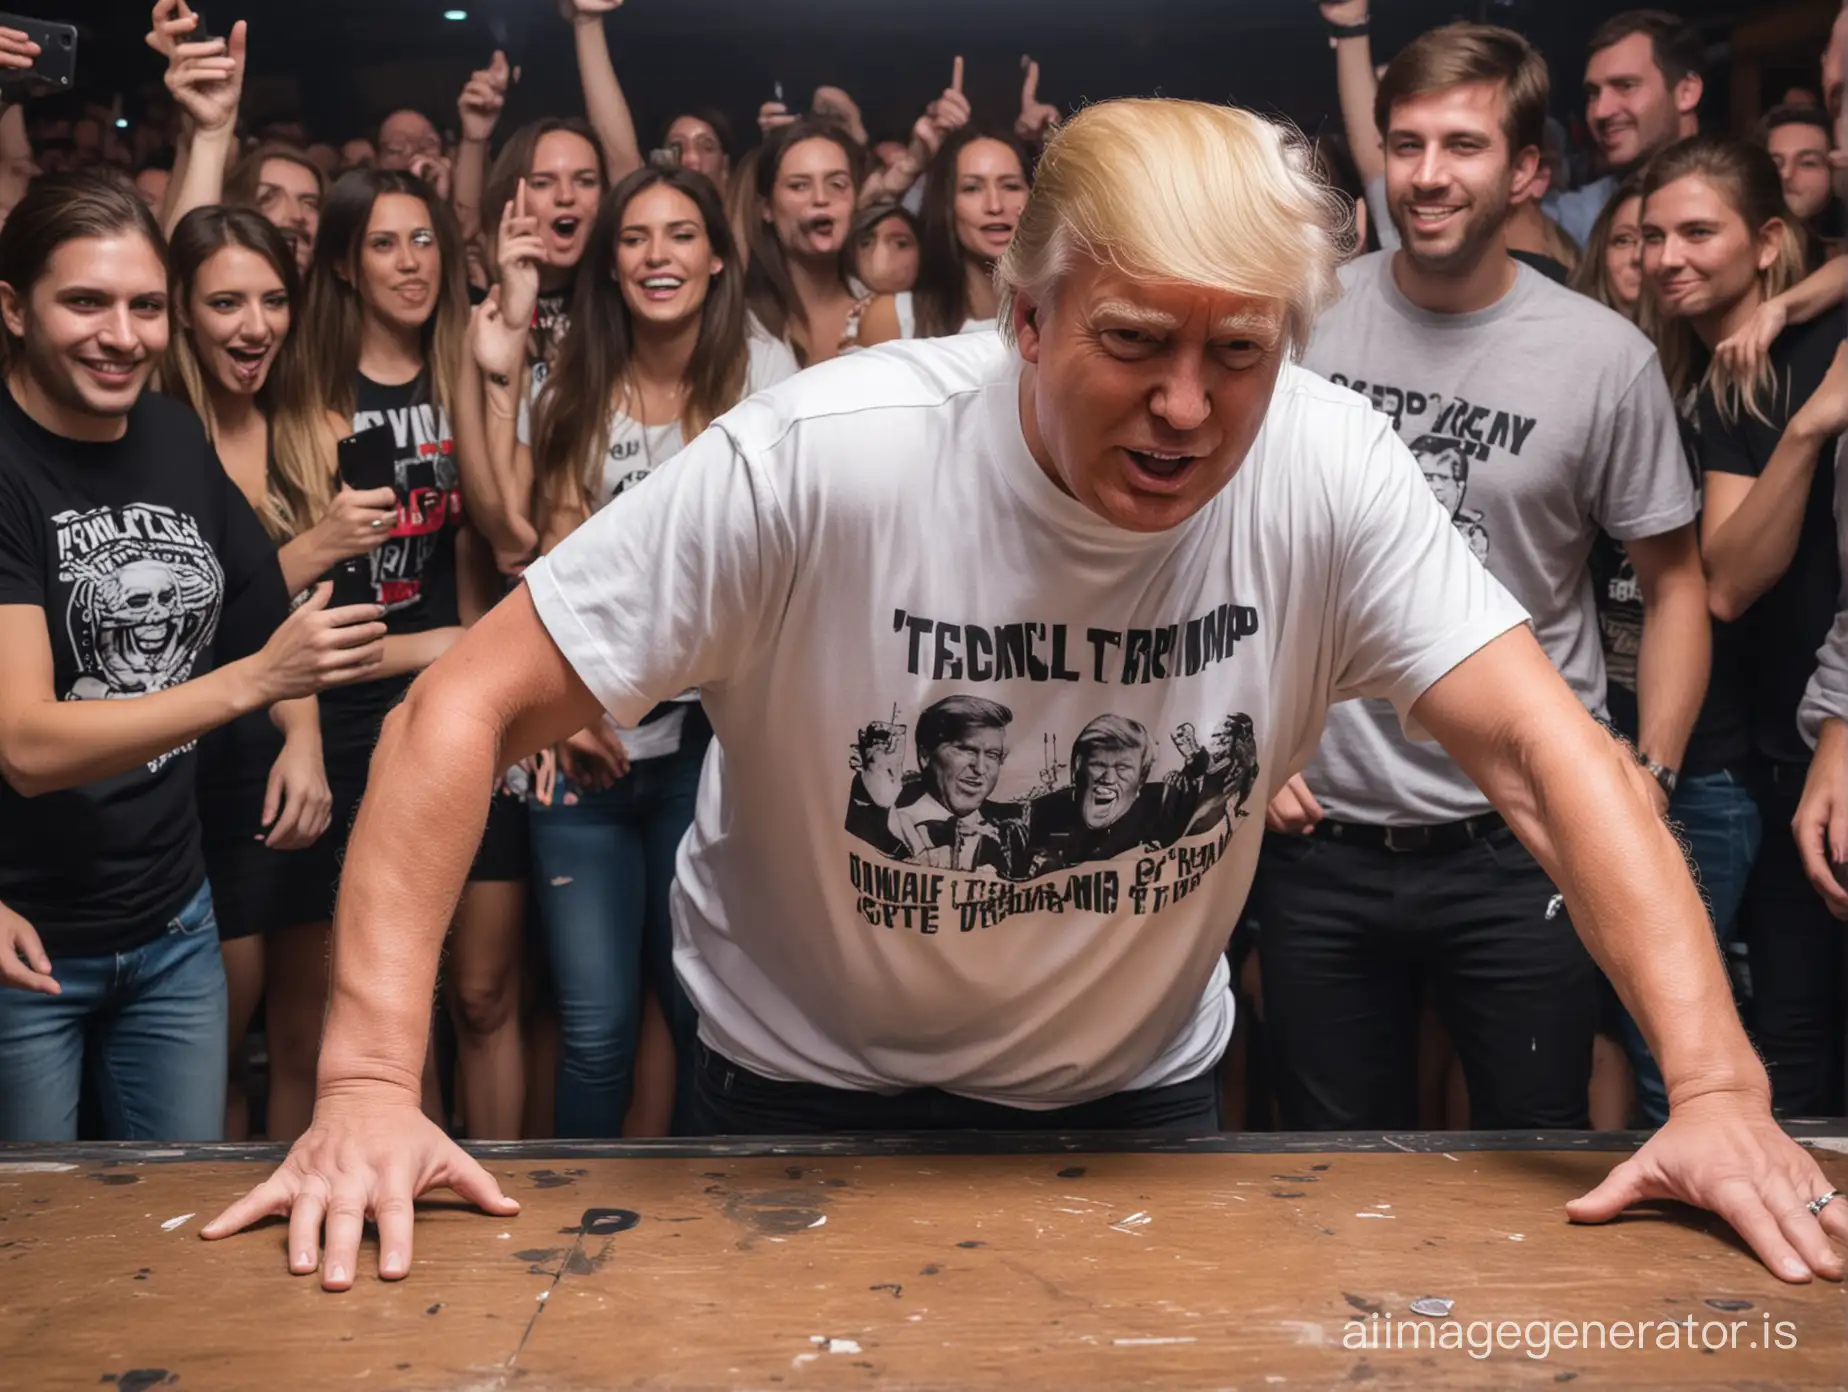 Donald-Trump-Dancing-in-TShirt-at-Techno-Club-Party